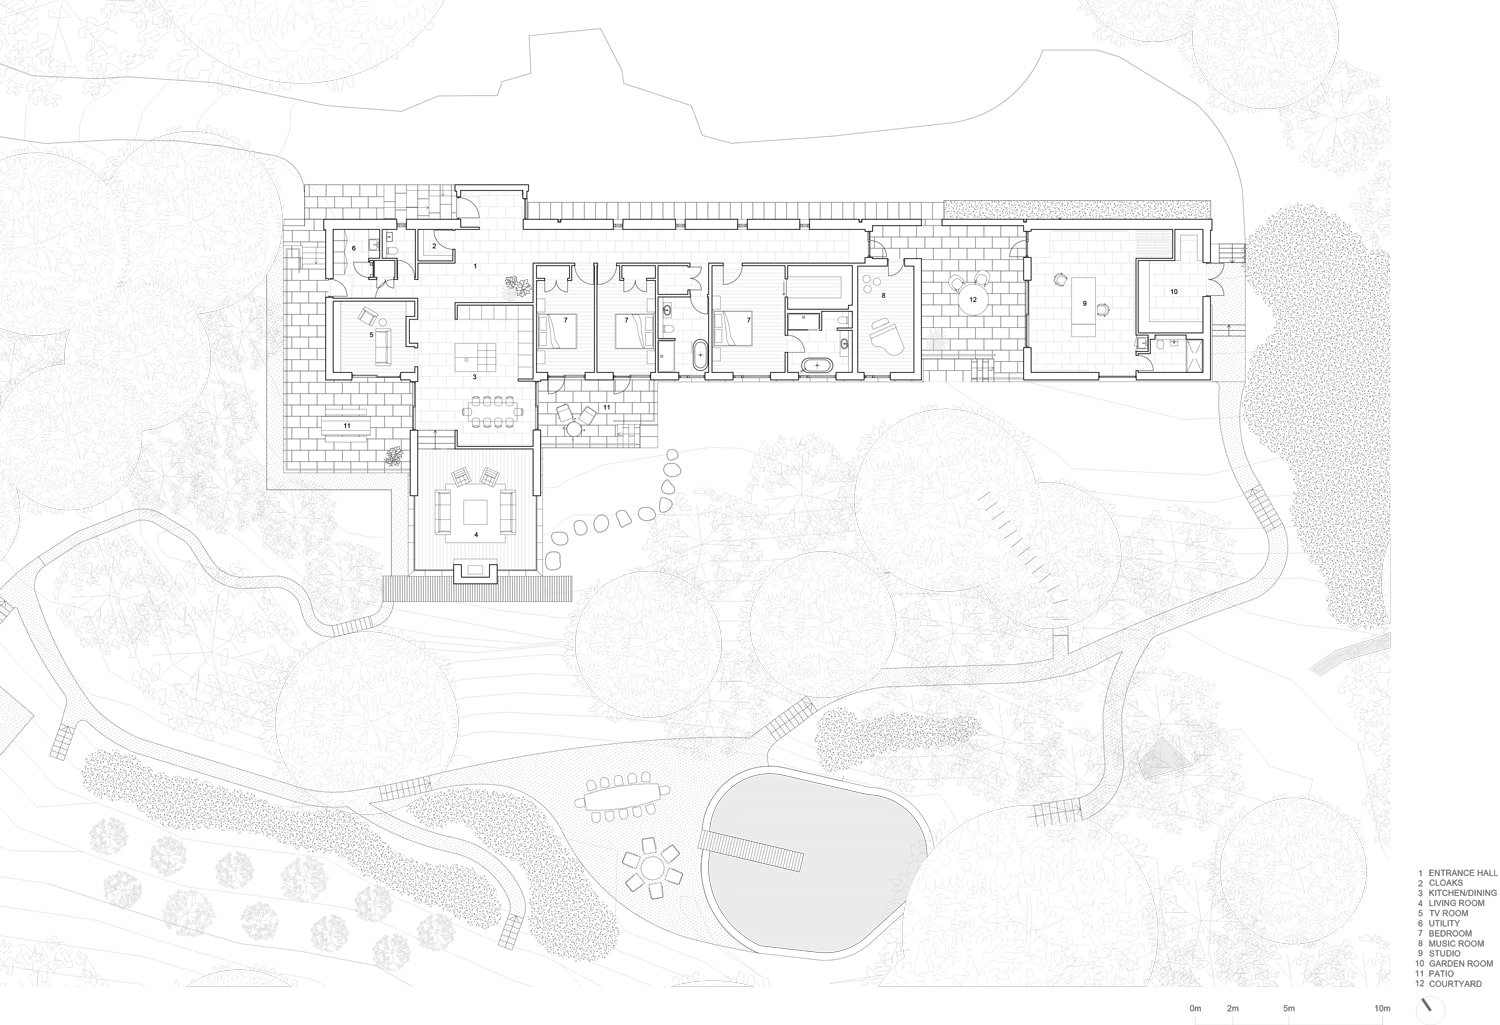 gia-design-awards-2022-residential-small-highly-commended-technique-architecture-and-design-the-pond-house-floor-plan.jpg